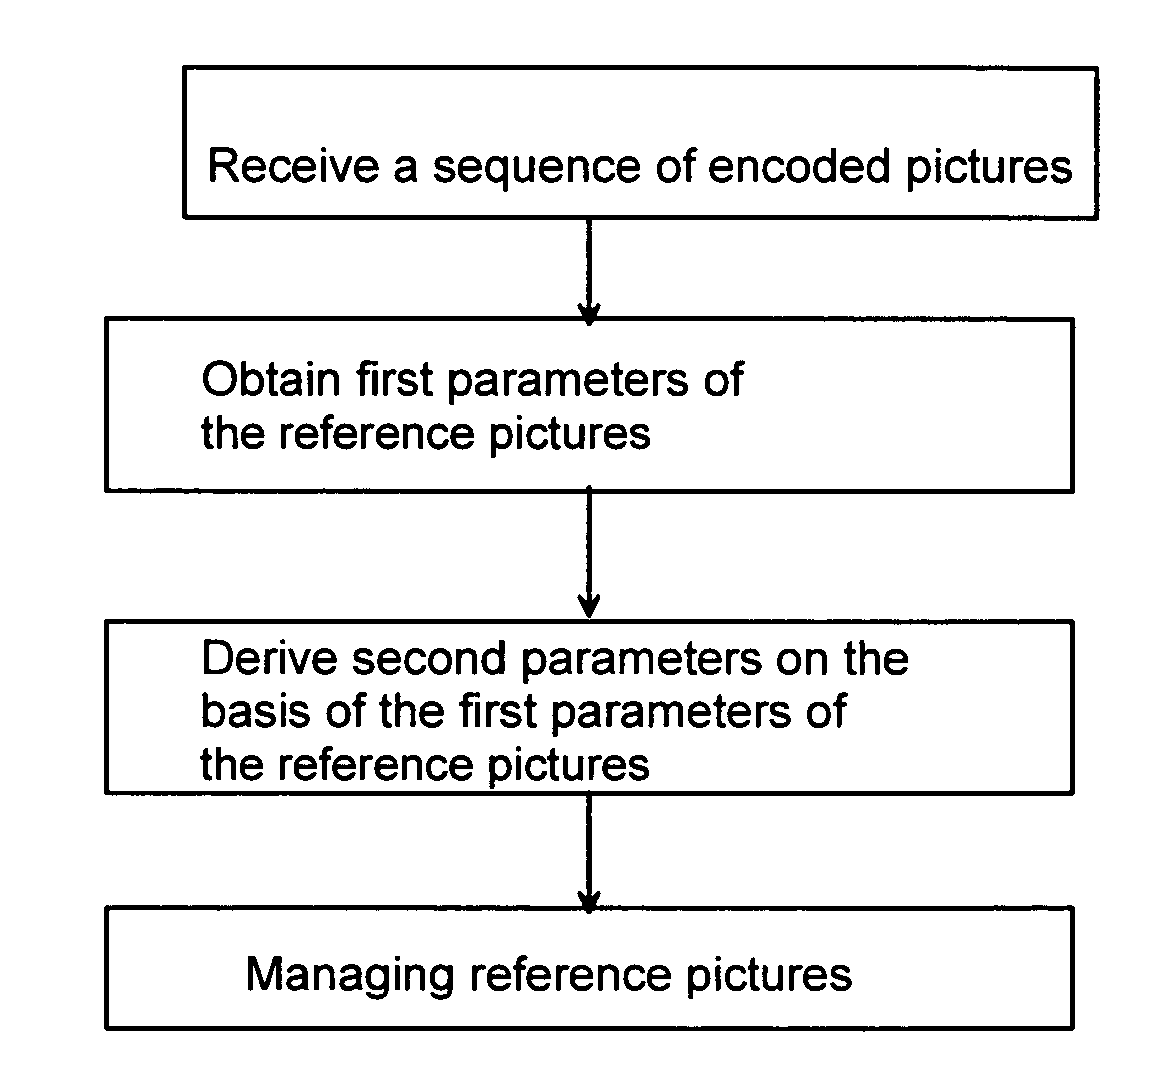 Reference picture management in video coding